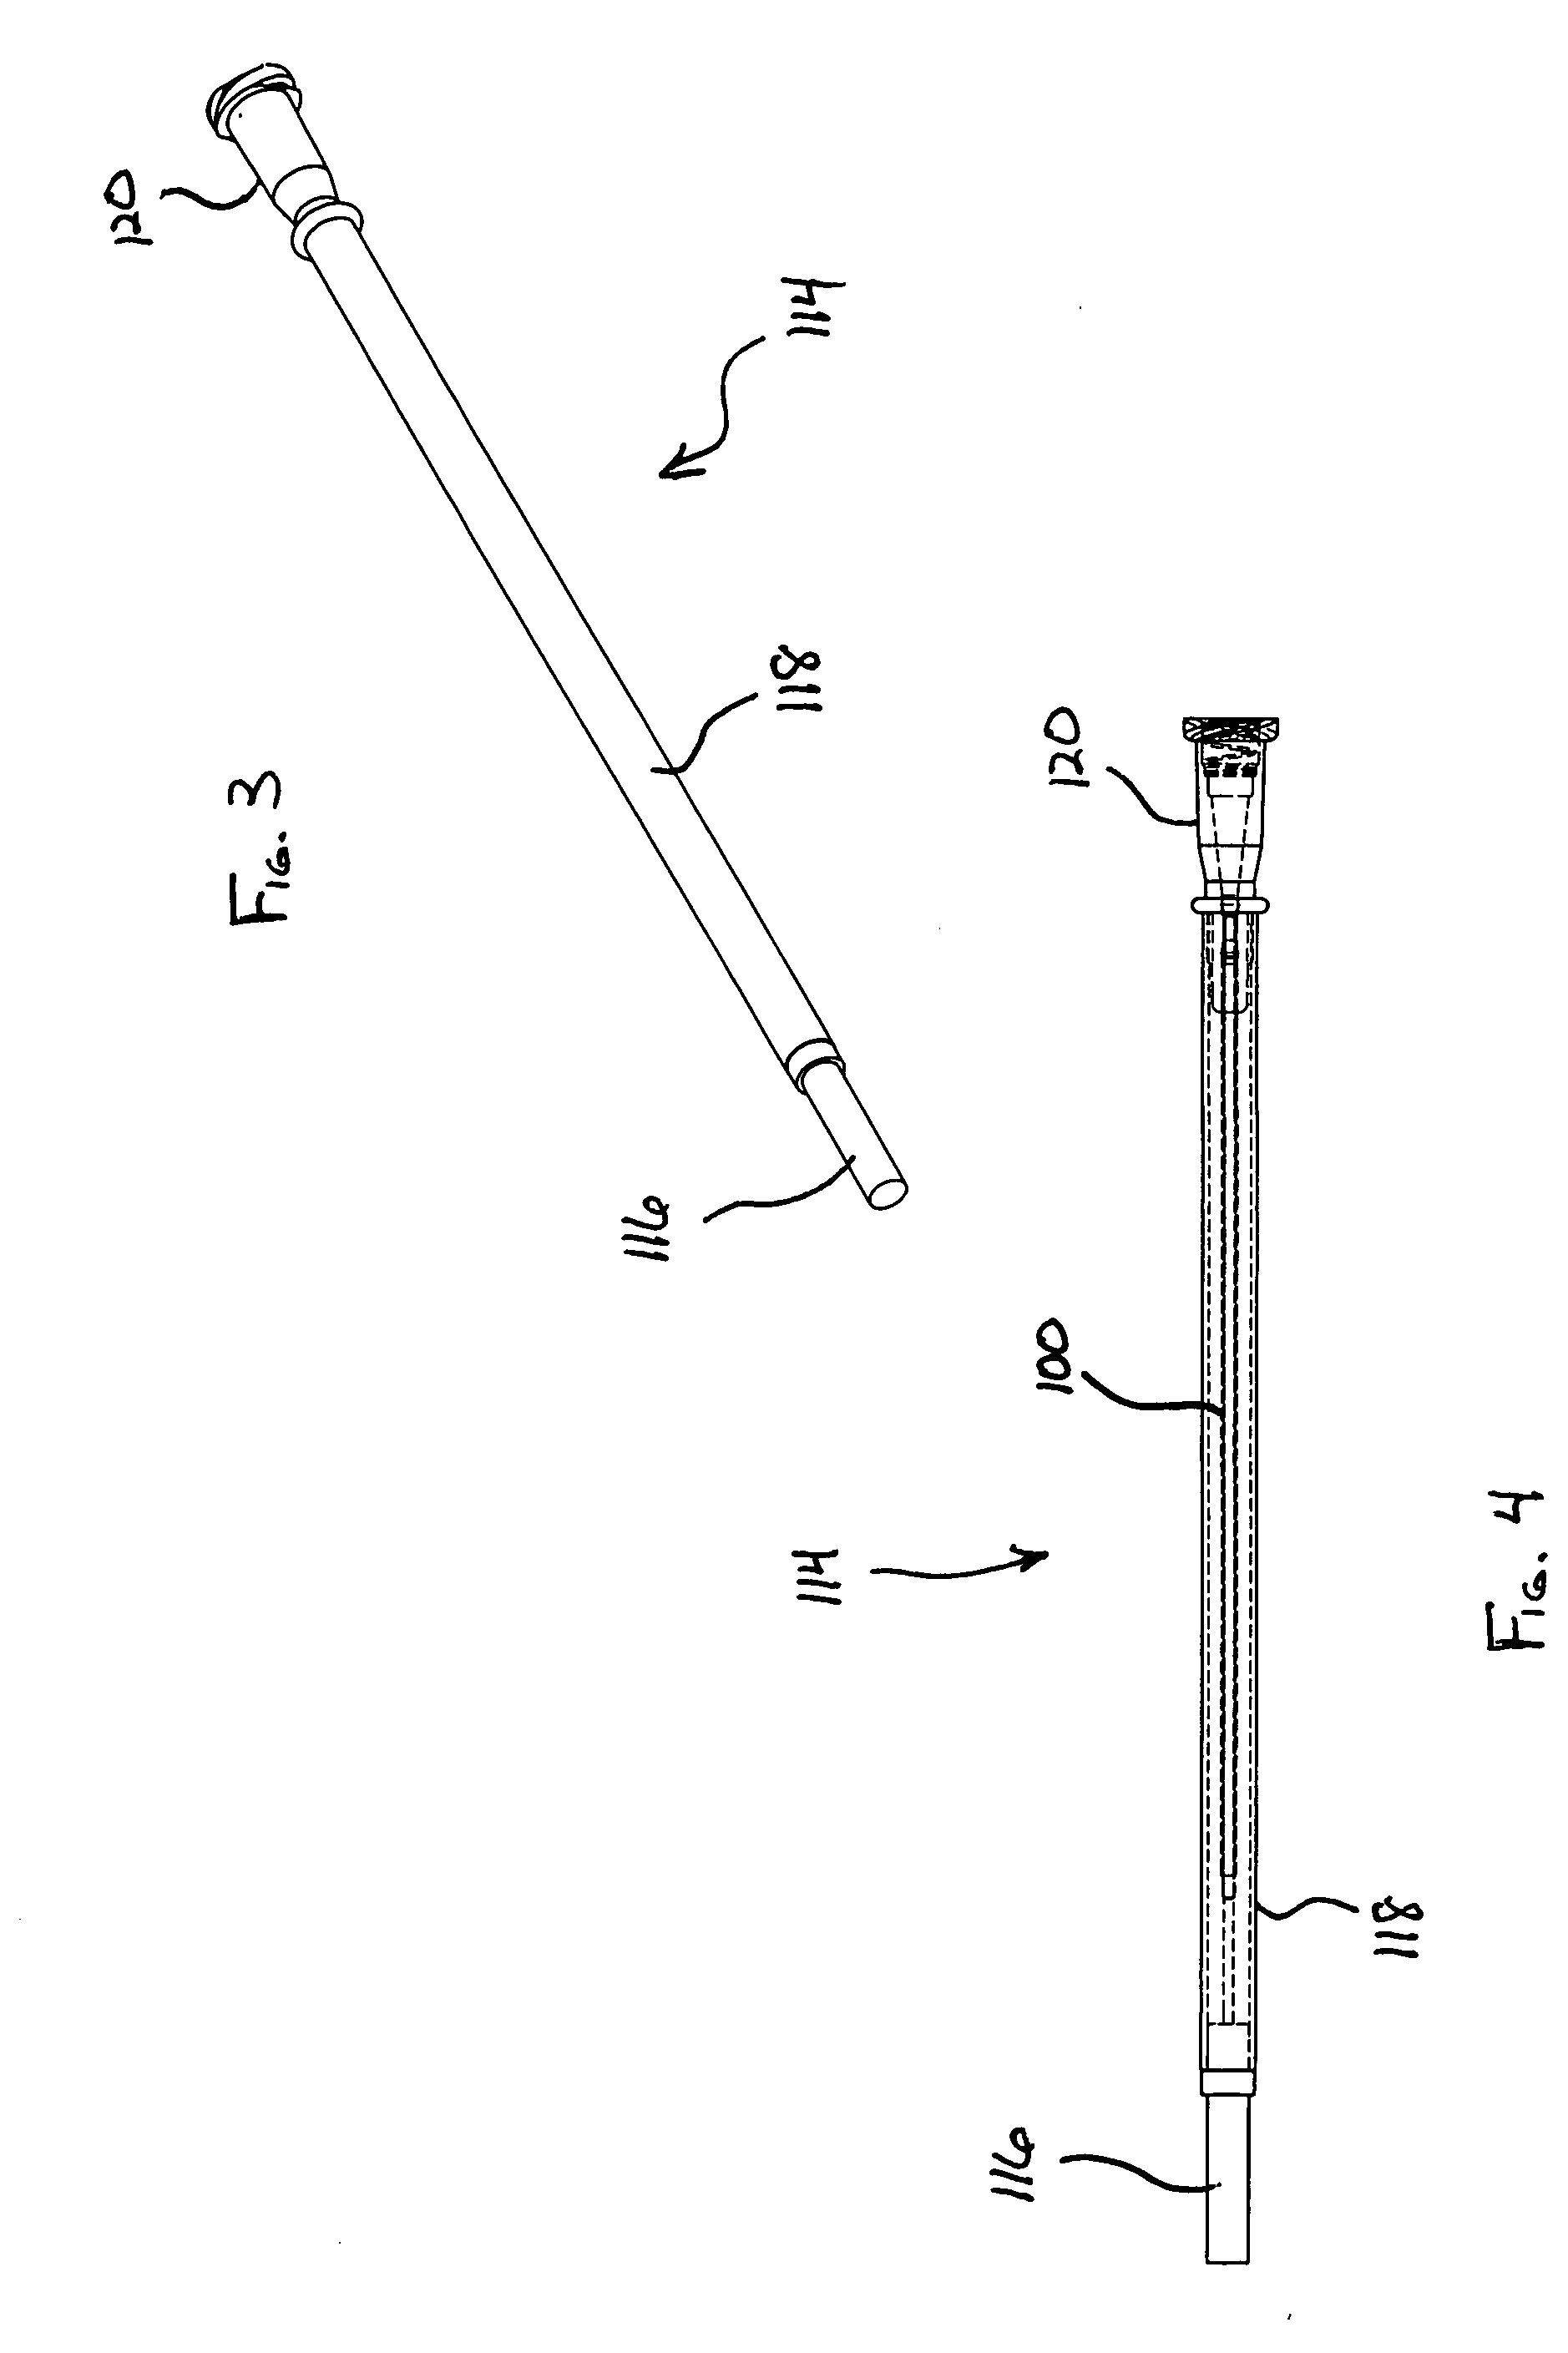 Selectively loadable/sealable bioresorbable carrier assembly for radioisotope seeds